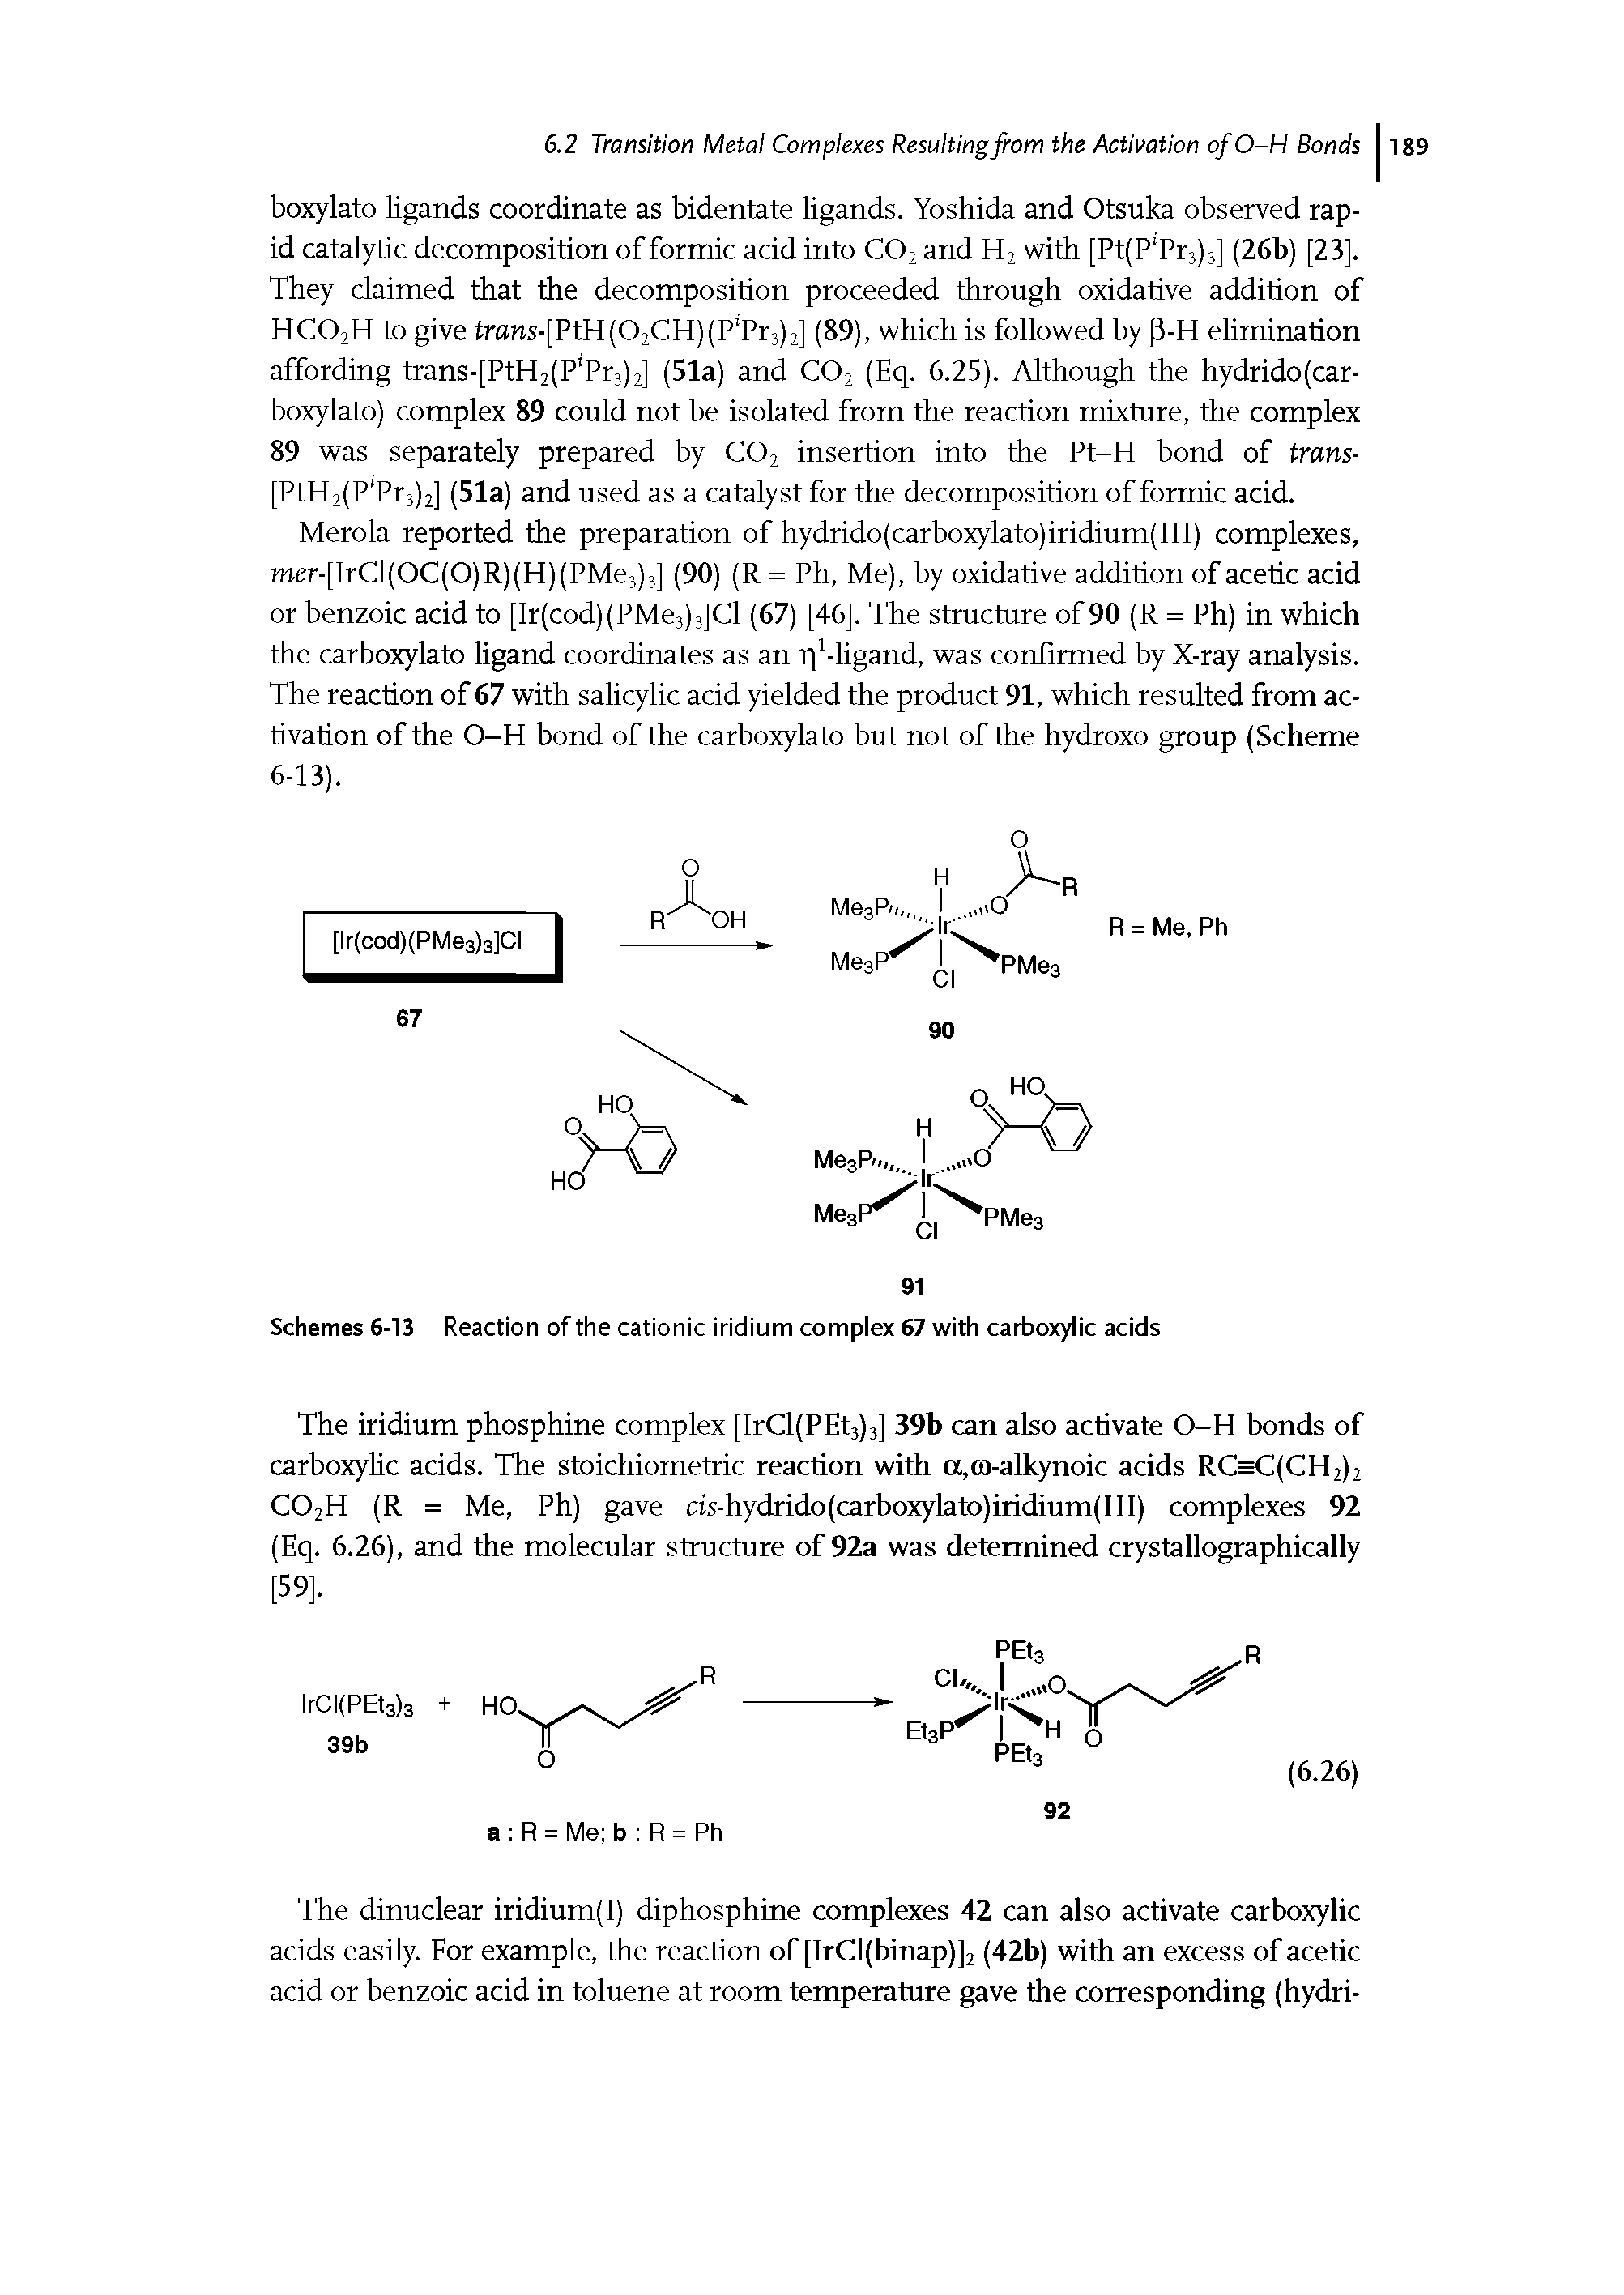 Schemes 6-13 Reaction of the cationic iridium complex 67 with carboxylic acids...